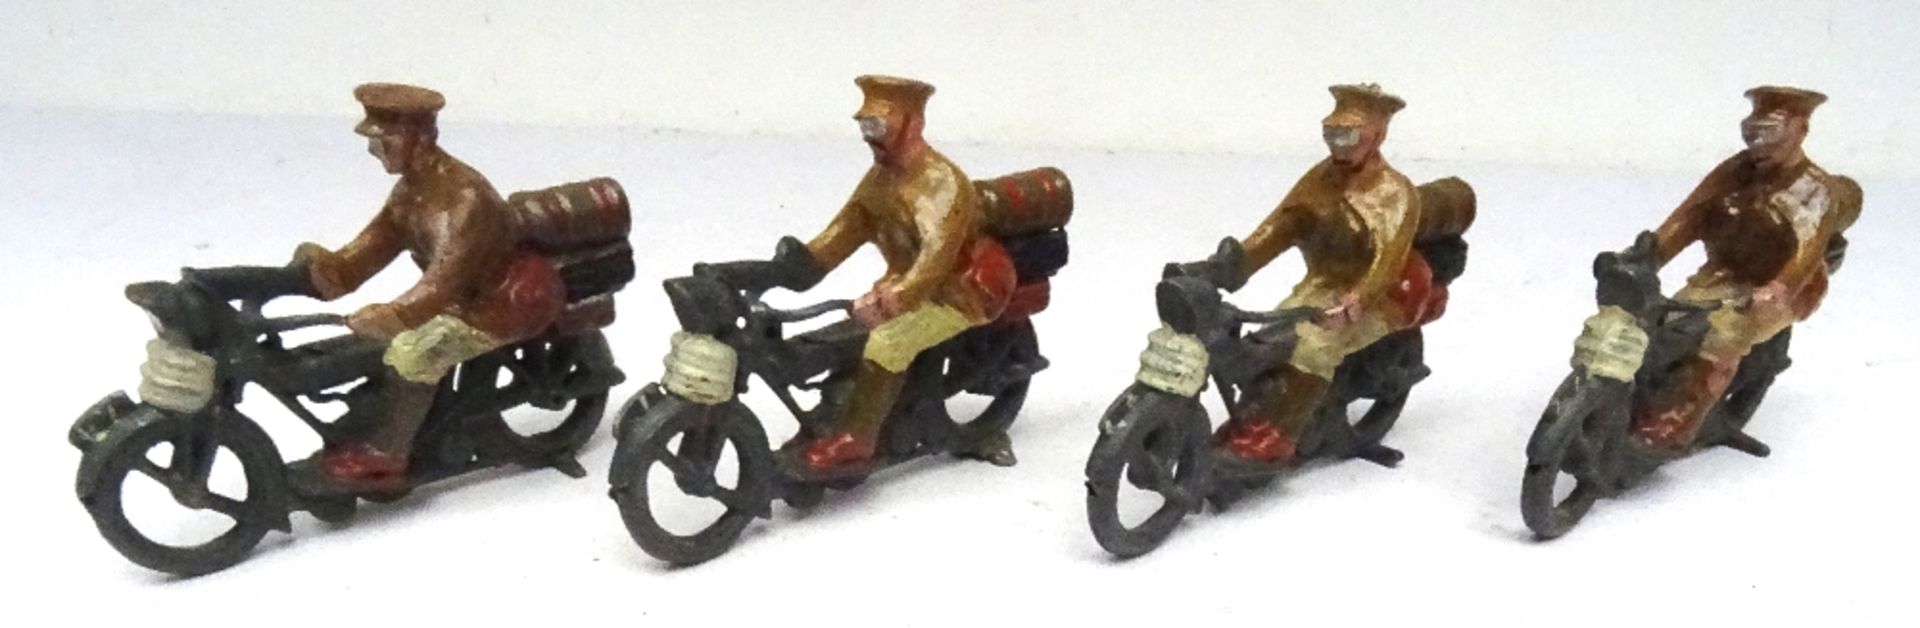 Britains set 200, Motor Cycle Corps Dispatch Riders - Image 3 of 6